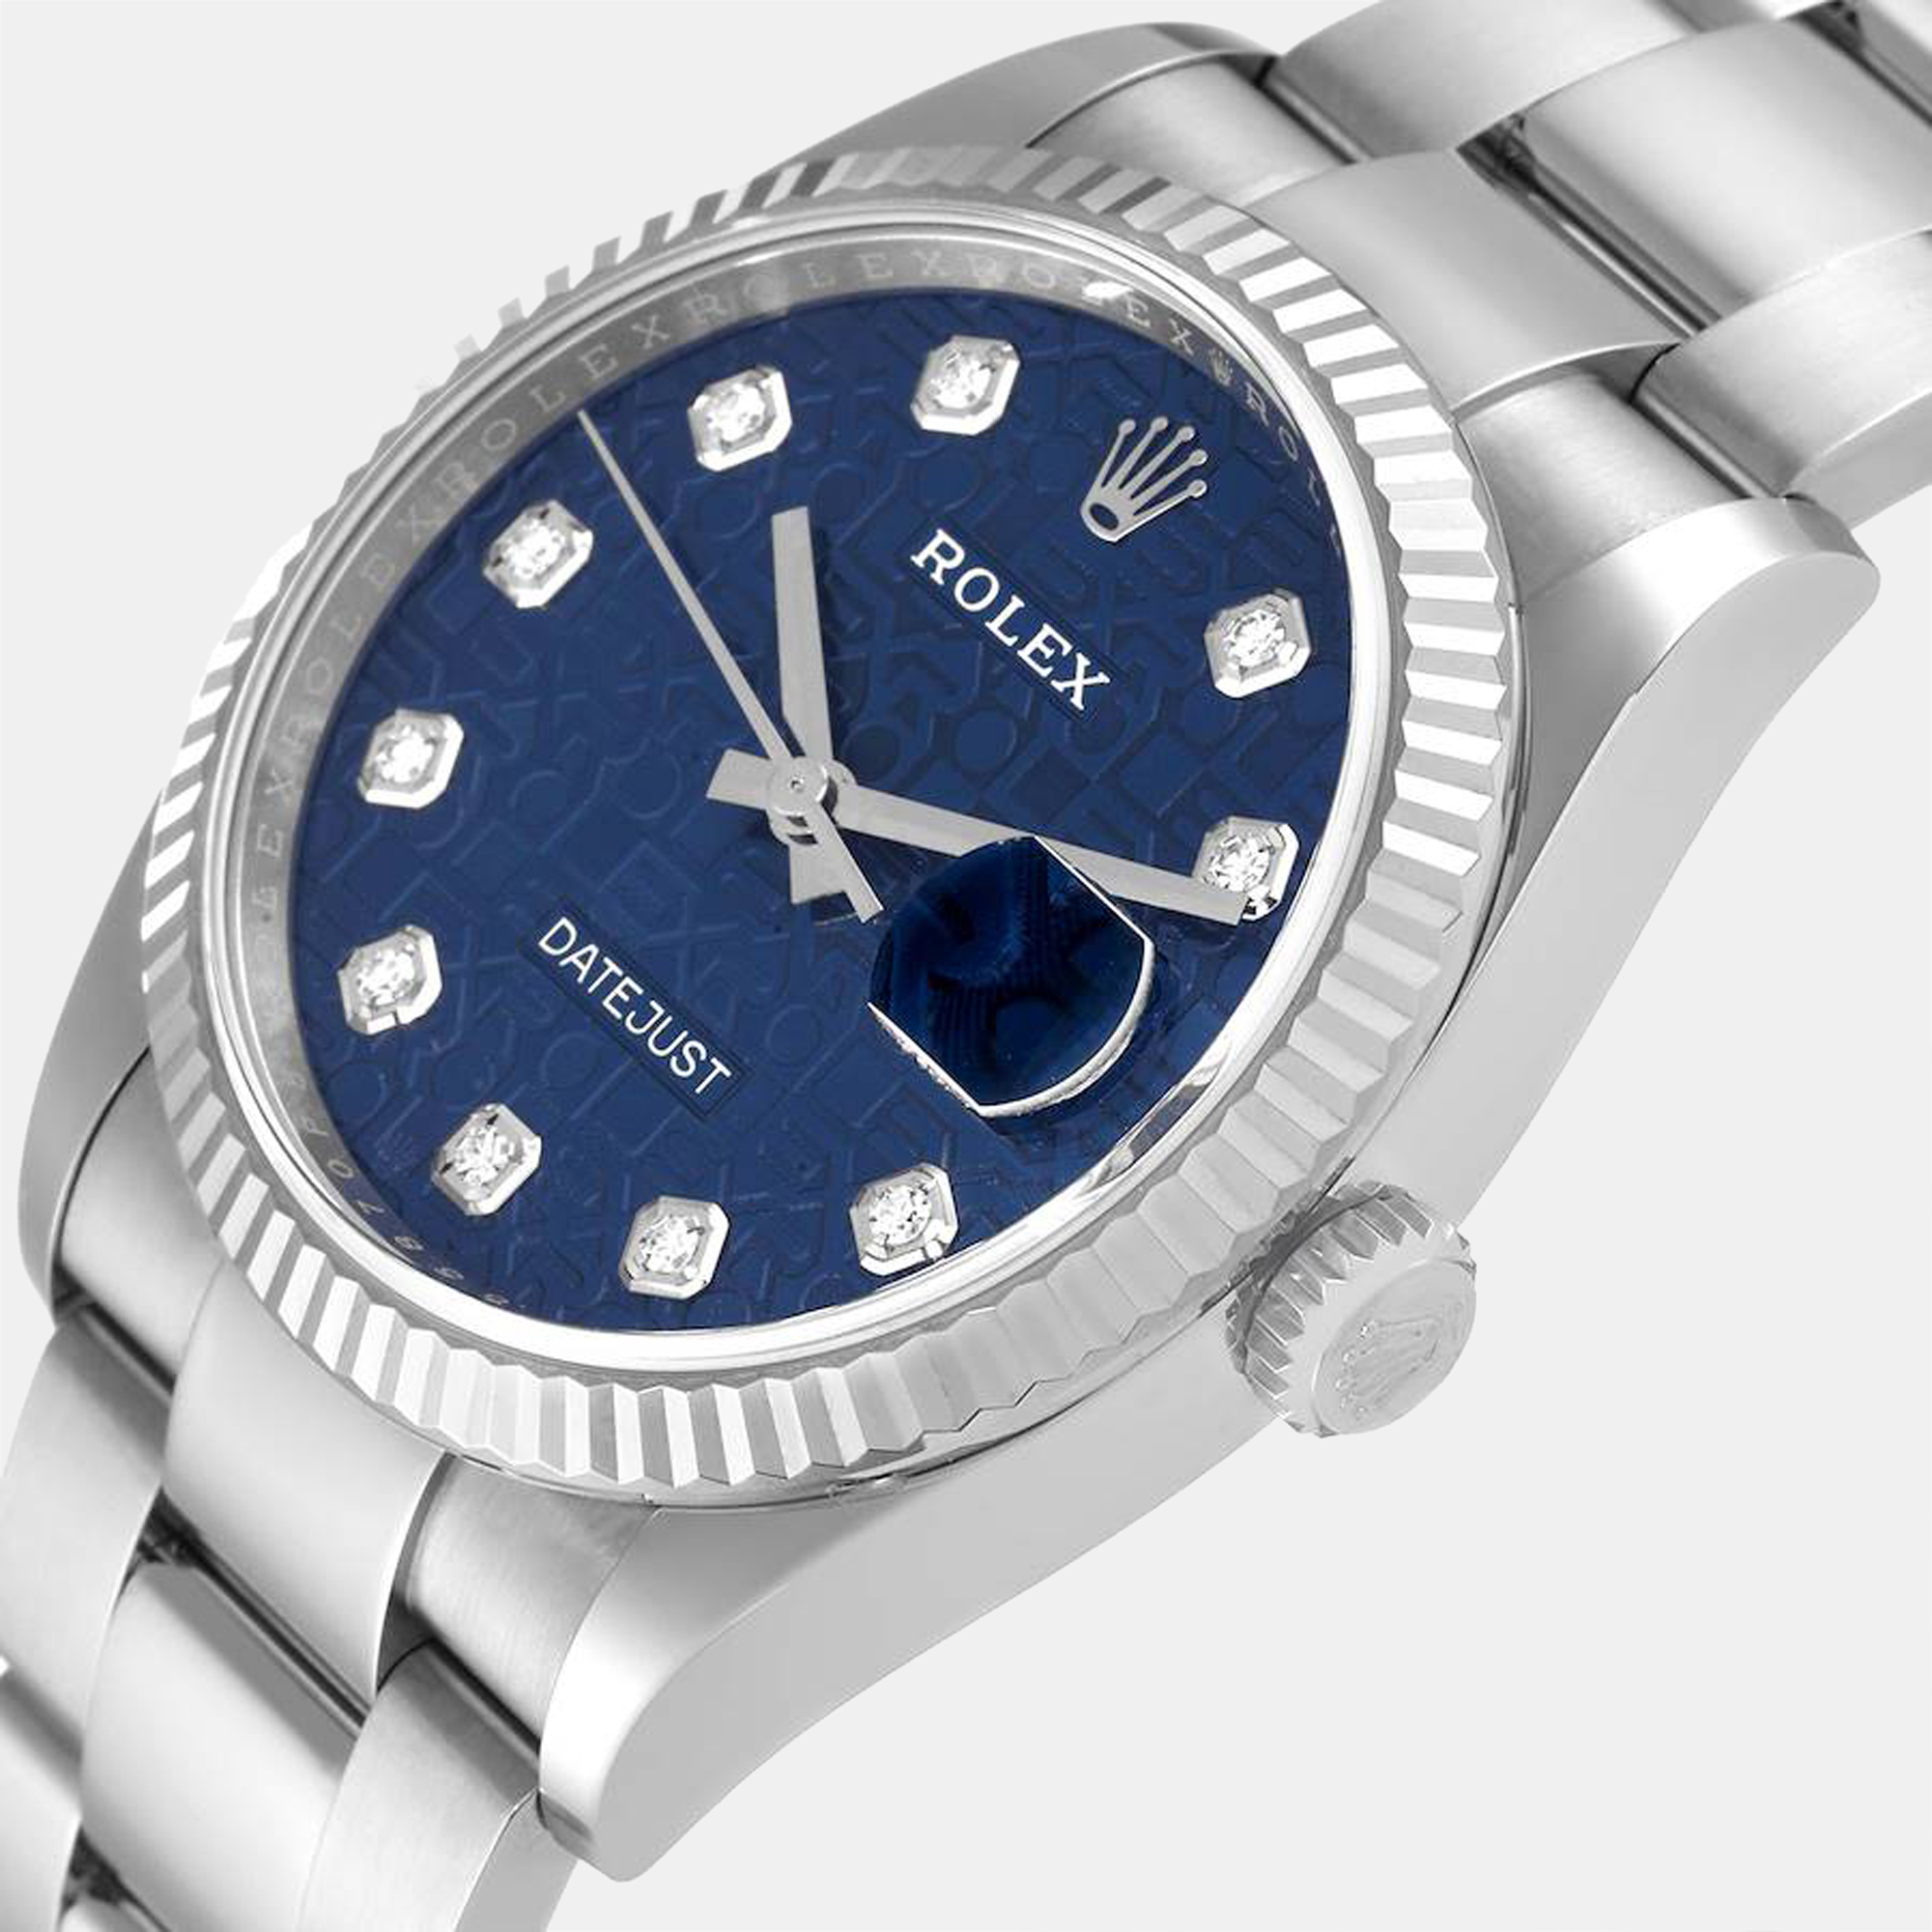 

Rolex Blue Diamonds 18k White Gold And Stainless Steel Datejust 126234 Automatic Men's Wristwatch 36 mm